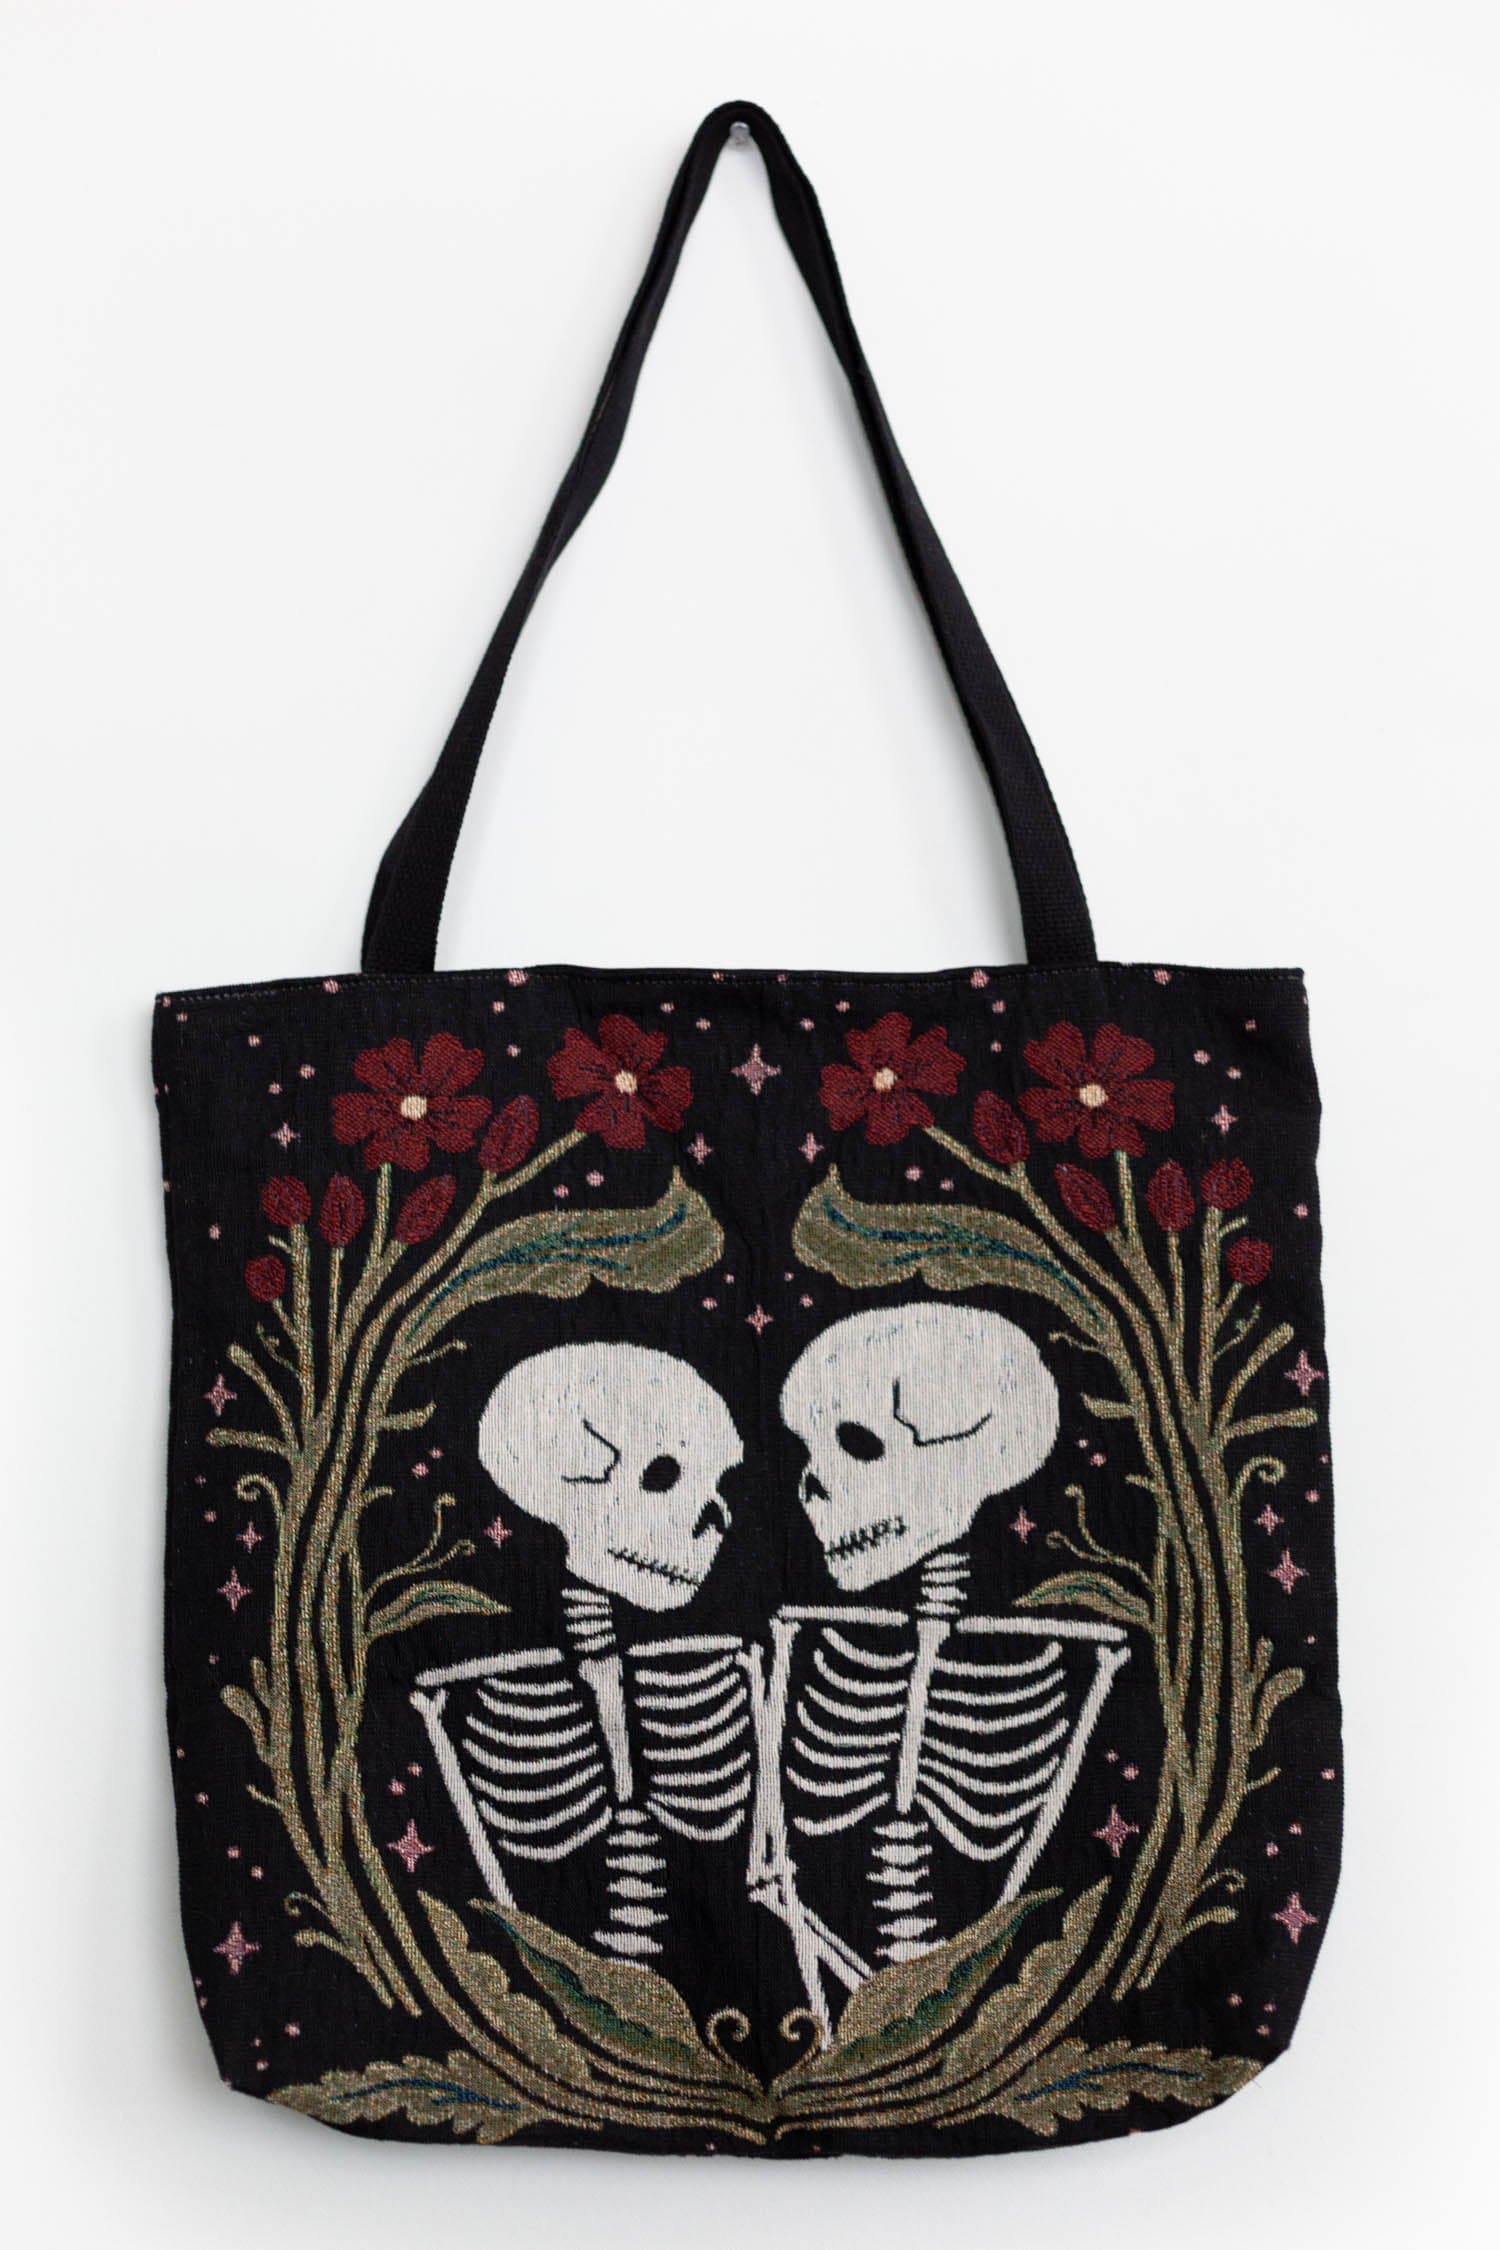 Skeletons Woven Tote